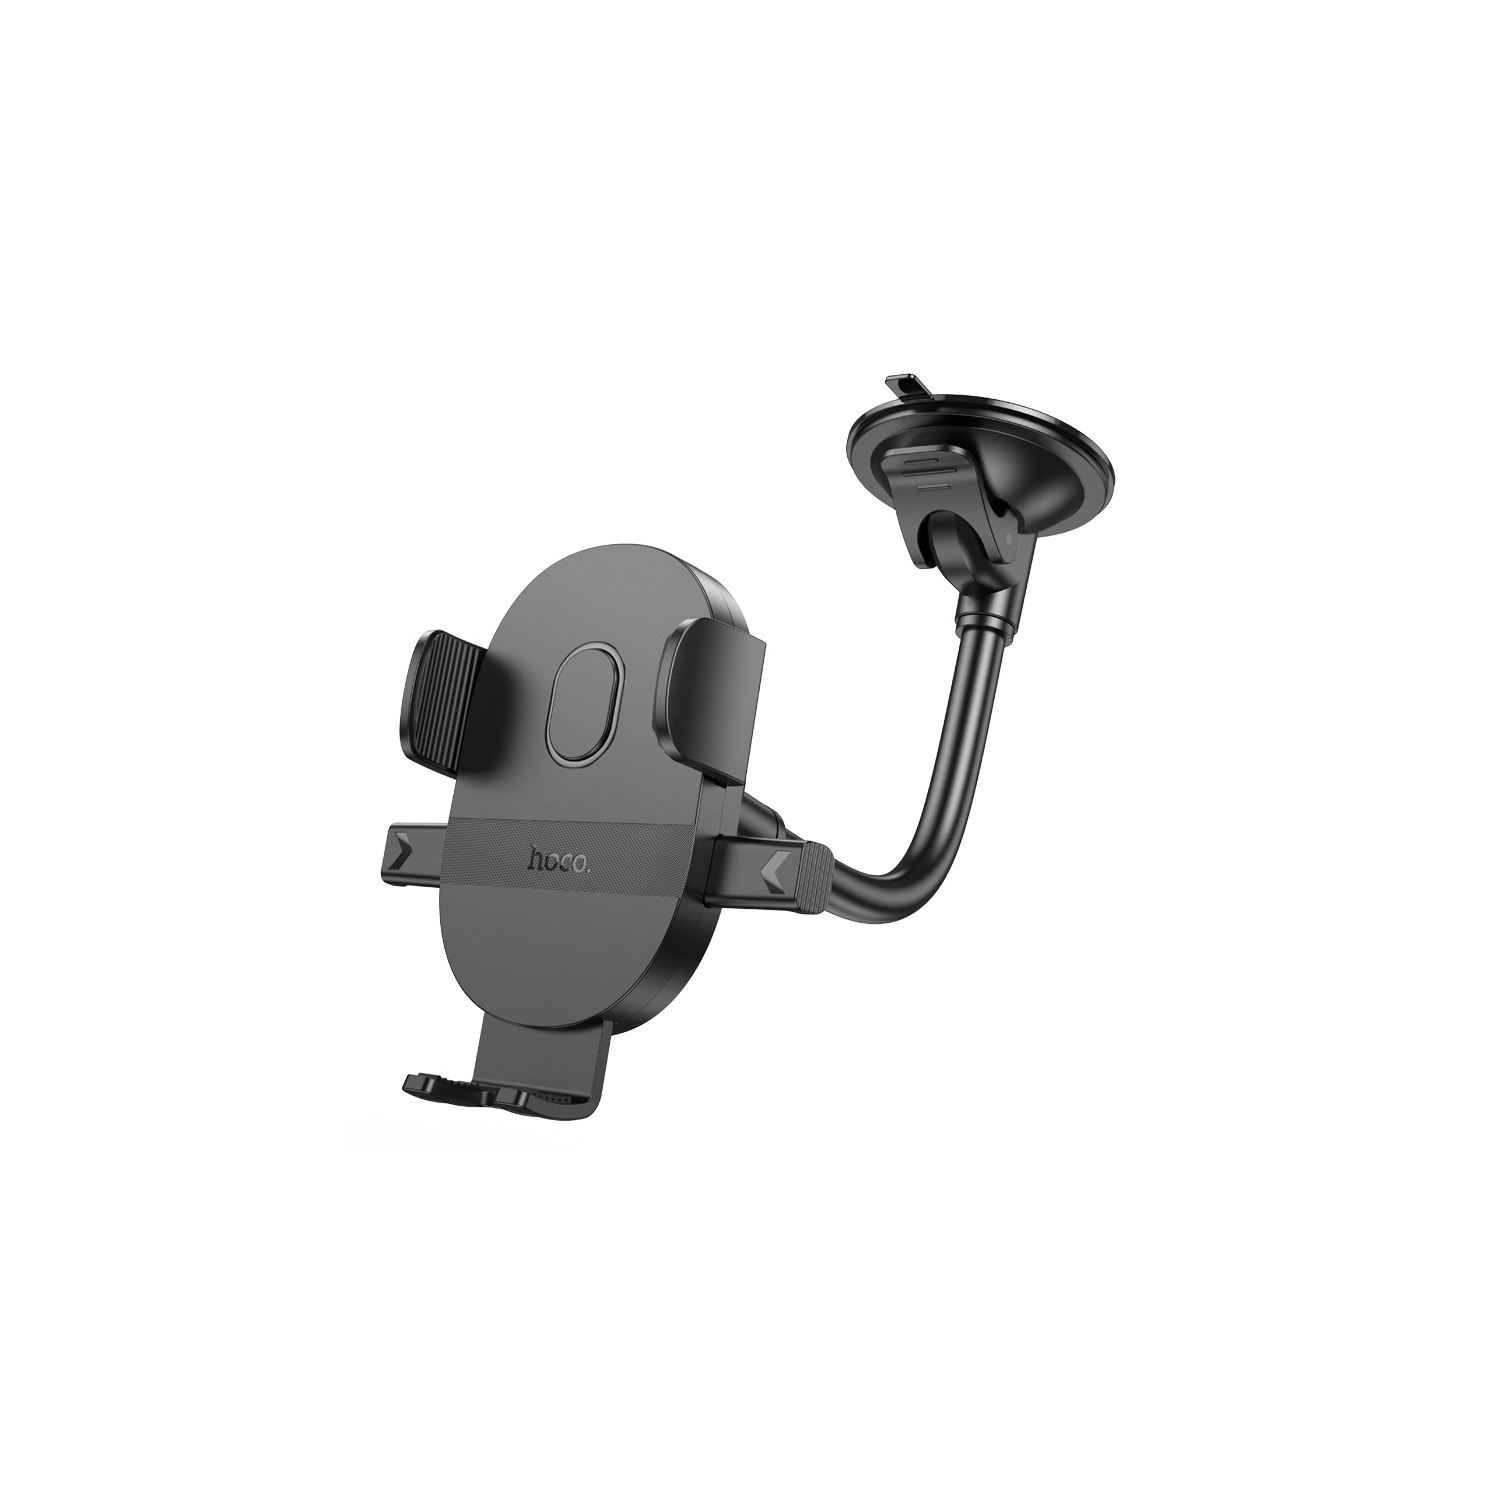 Sticky Suction Cup Windshield Mount Car Cell Phone Holder for iPhone Samsung Smartphones